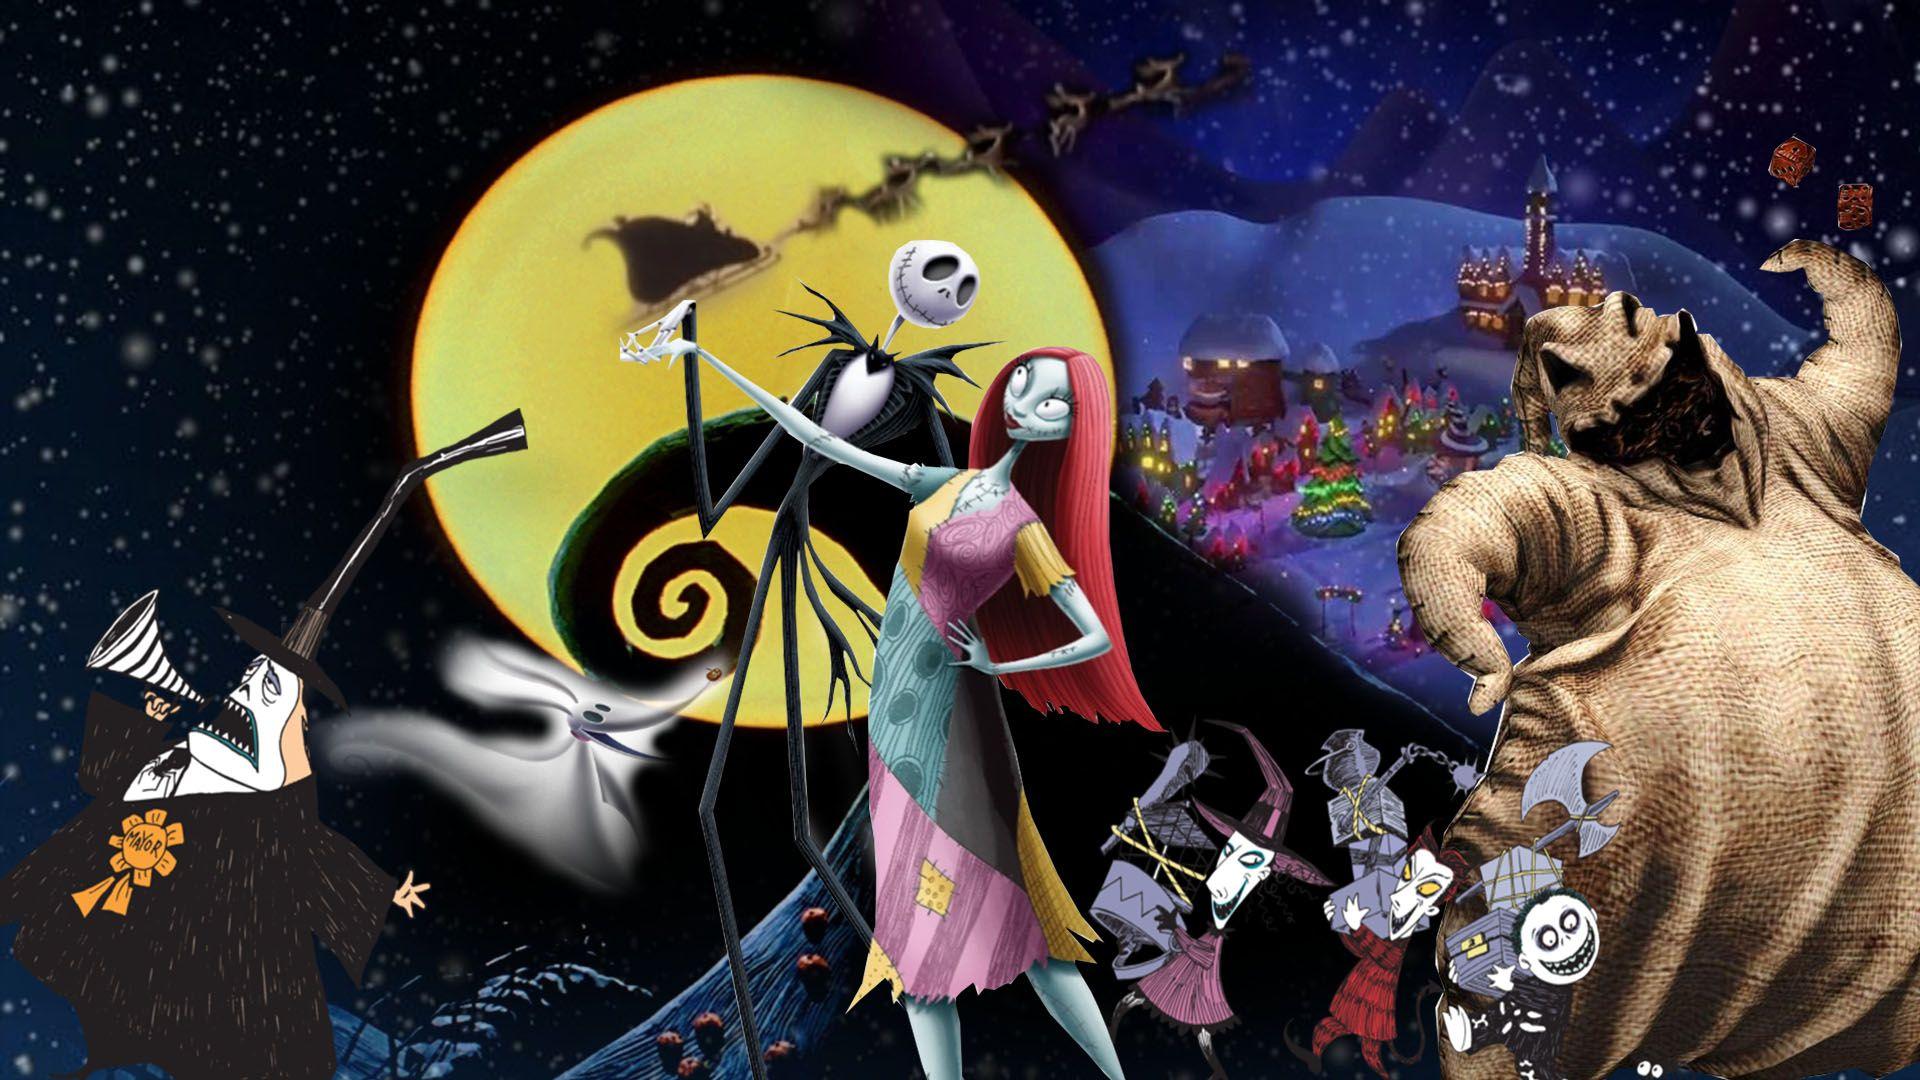 High Resolution Wallpapers the nightmare before christmas image 302 kB